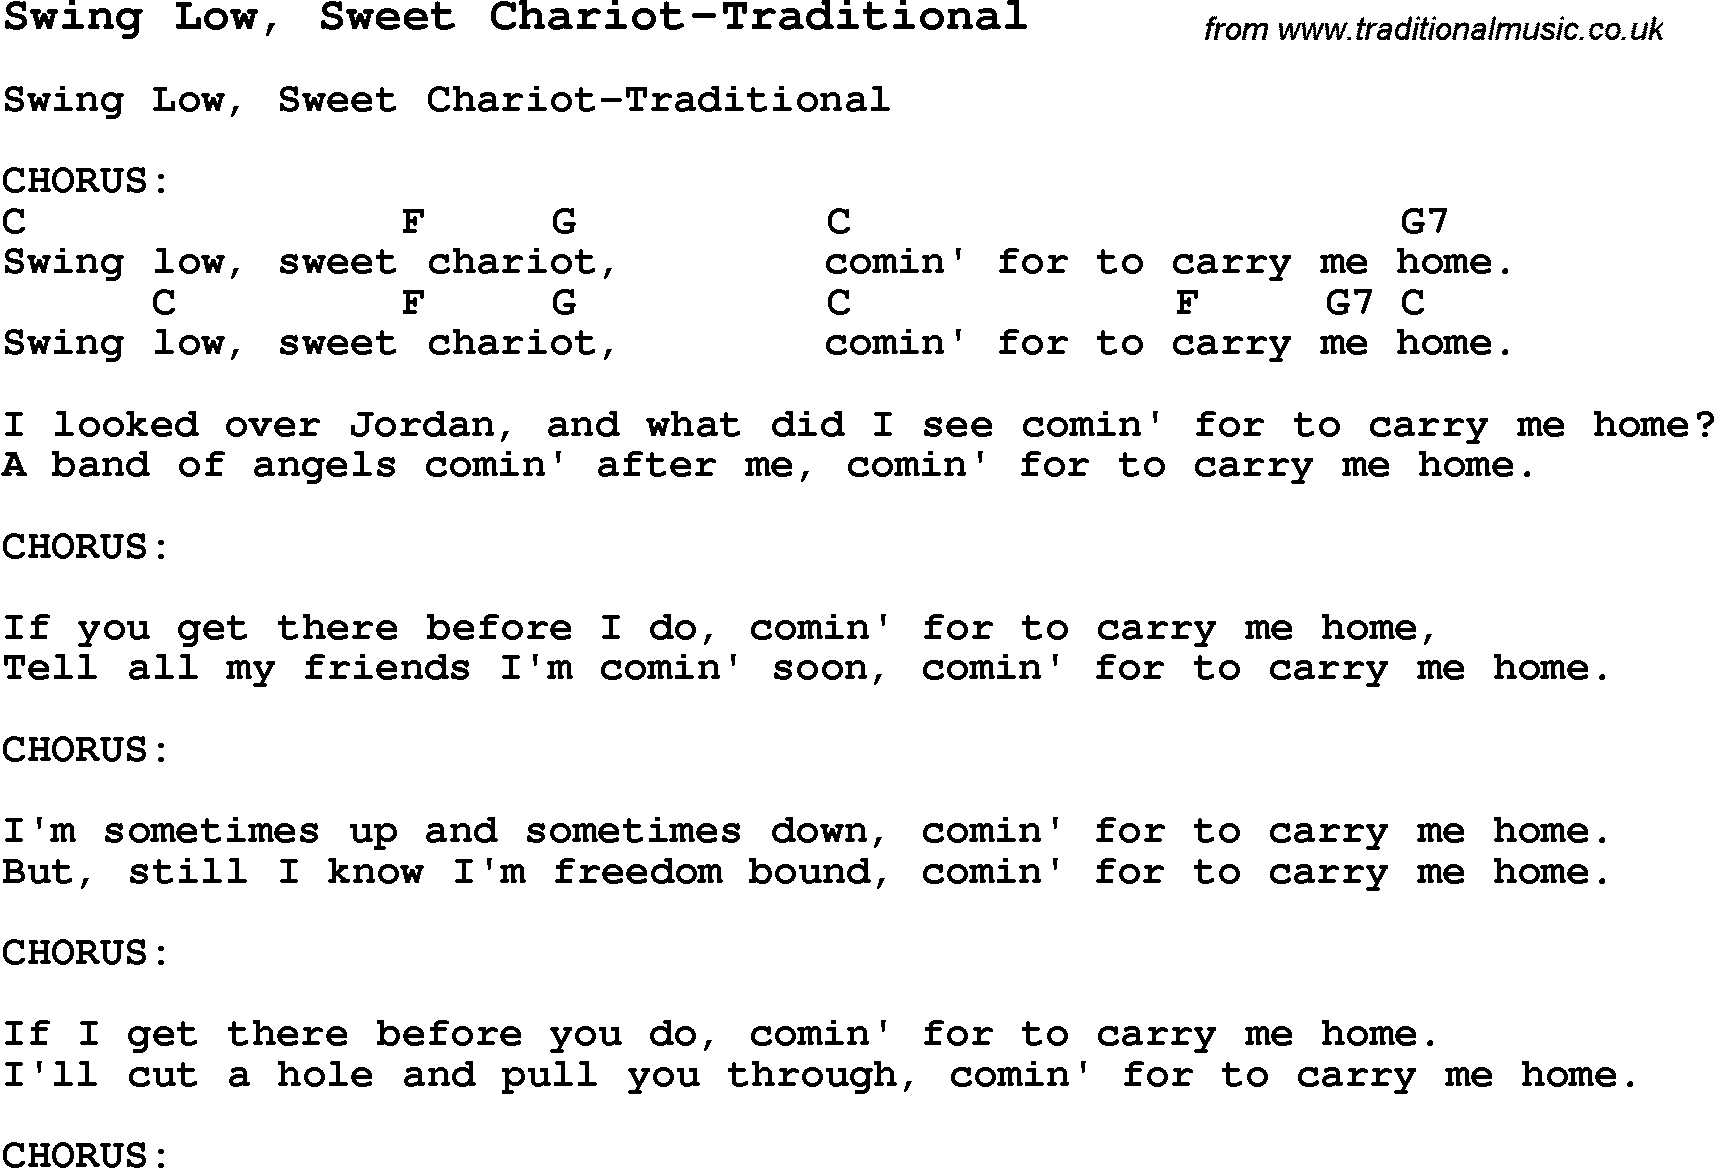 Summer-Camp Song, Swing Low, Sweet Chariot-Traditional, with lyrics and chords for Ukulele, Guitar Banjo etc.